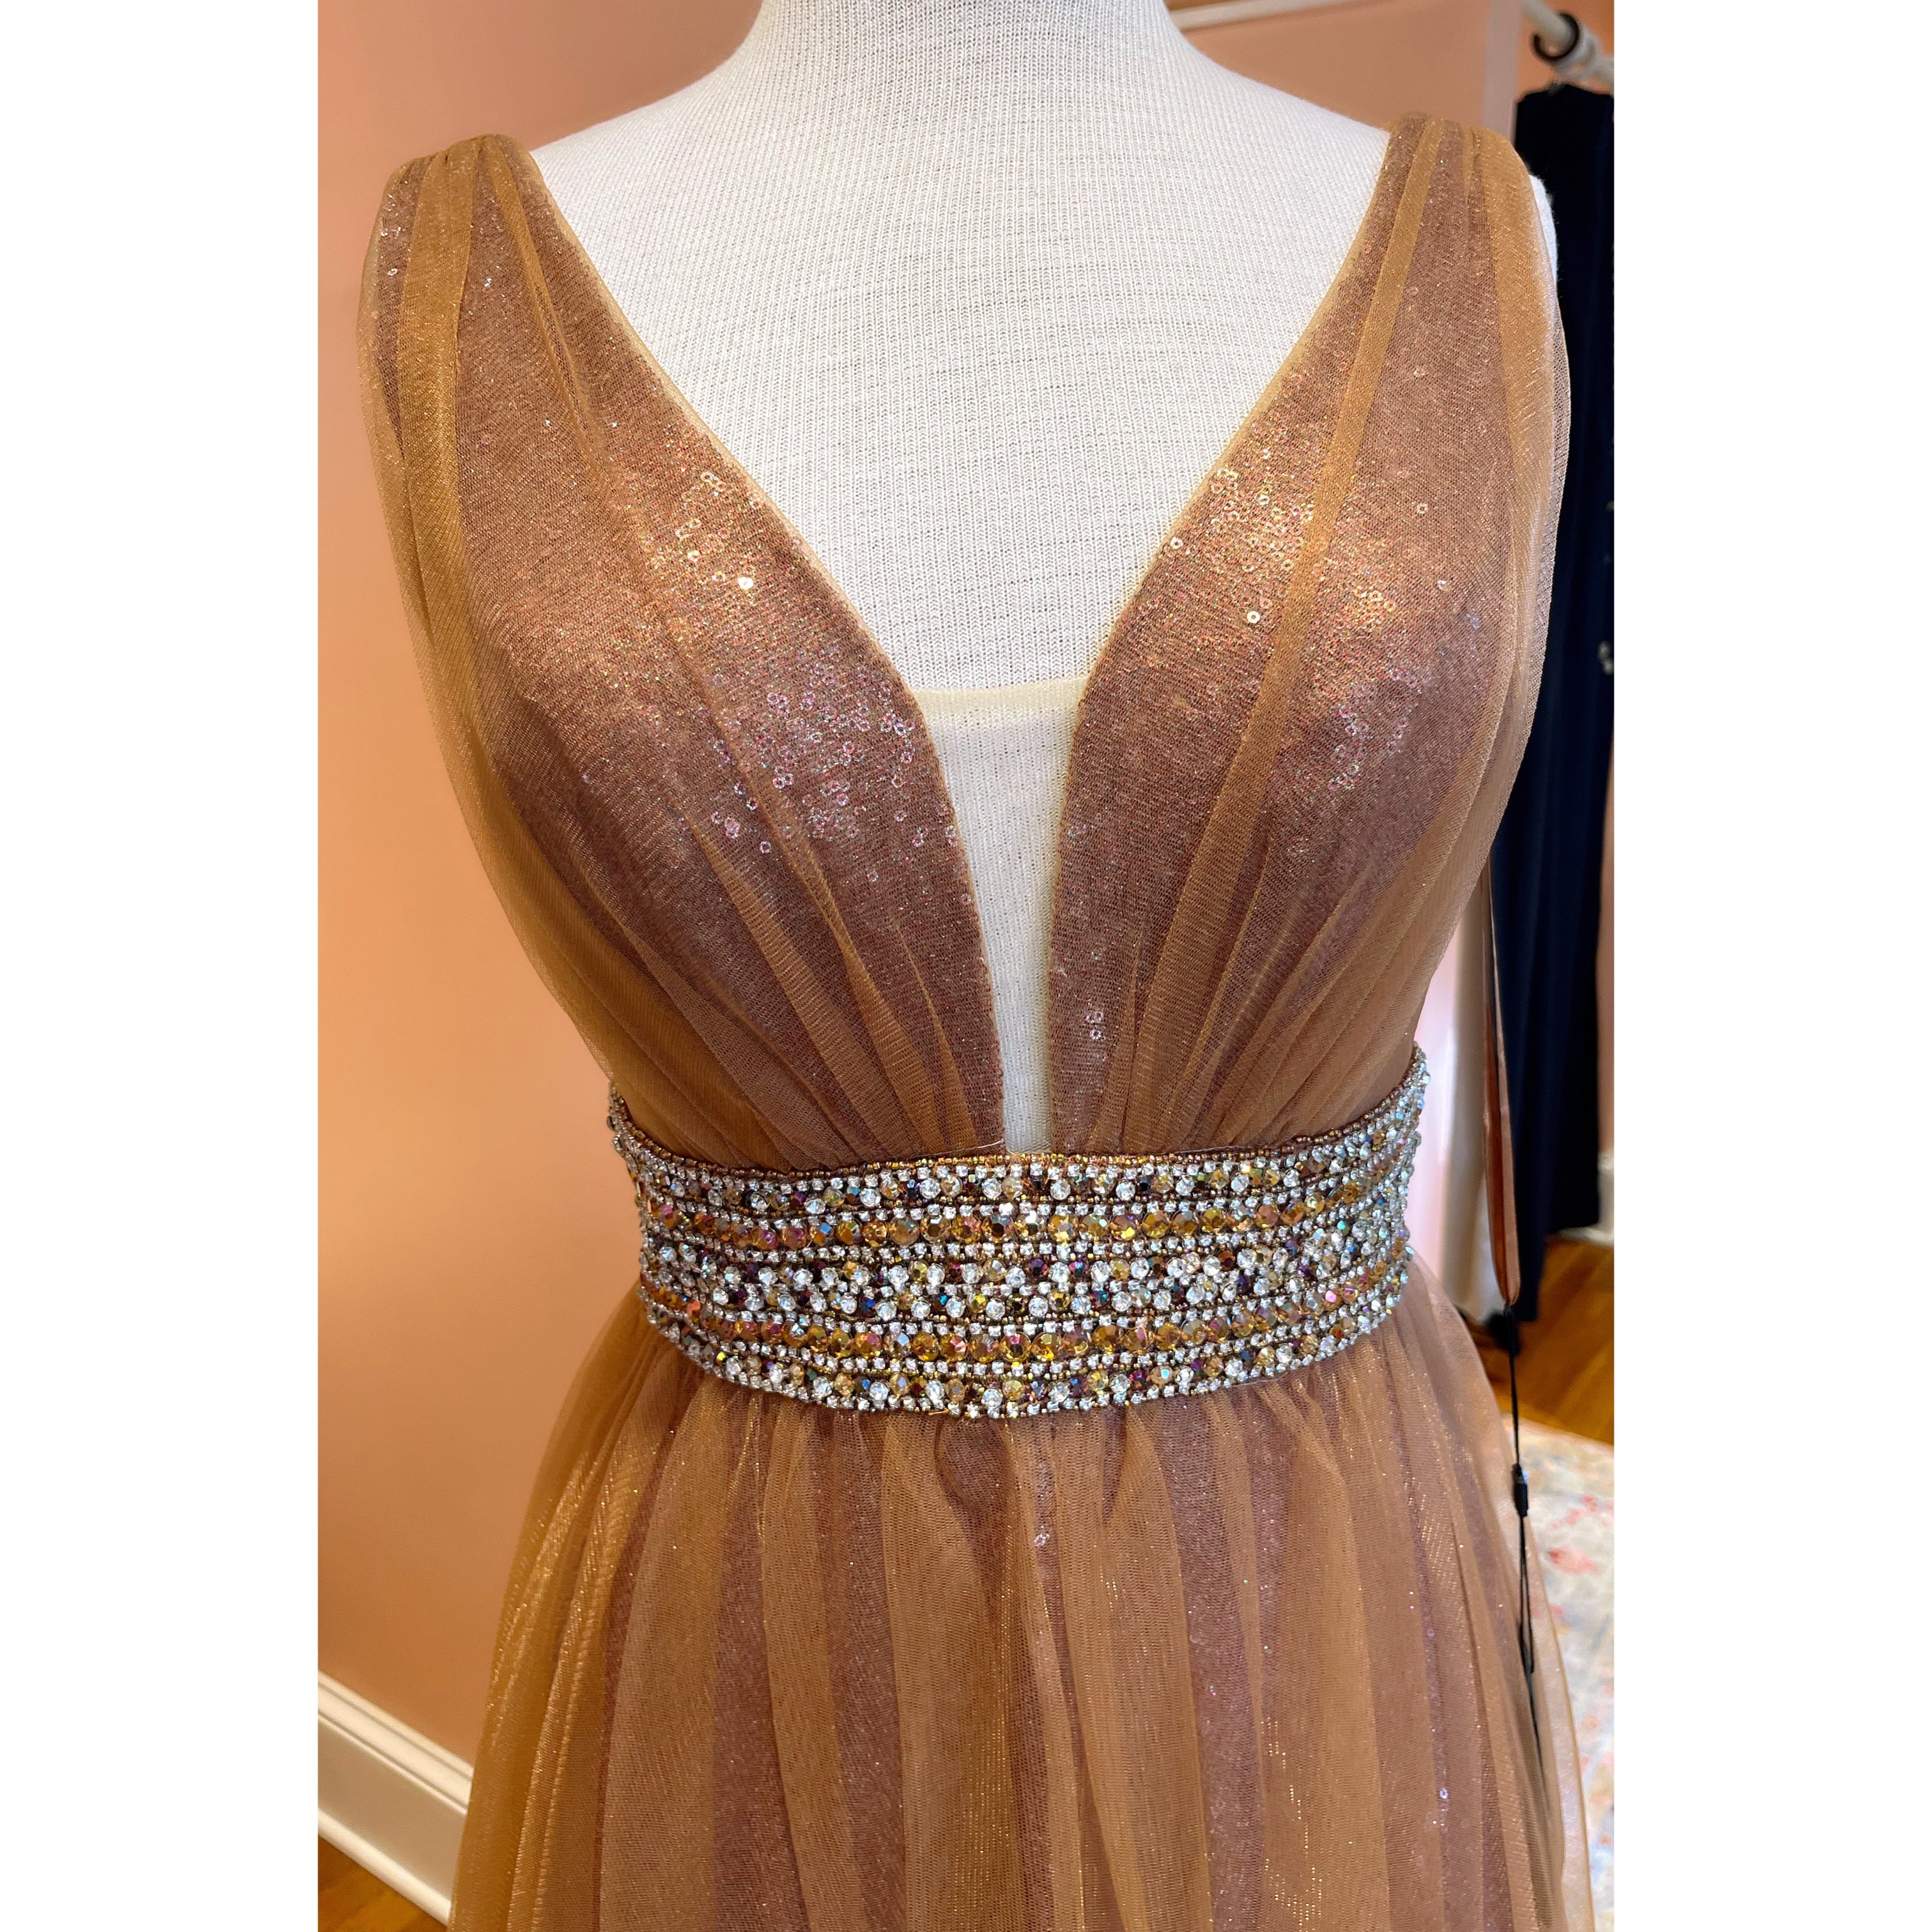 Lucci Lu bronze ballgown, sizes 4 & 6, NEW WITH TAGS!